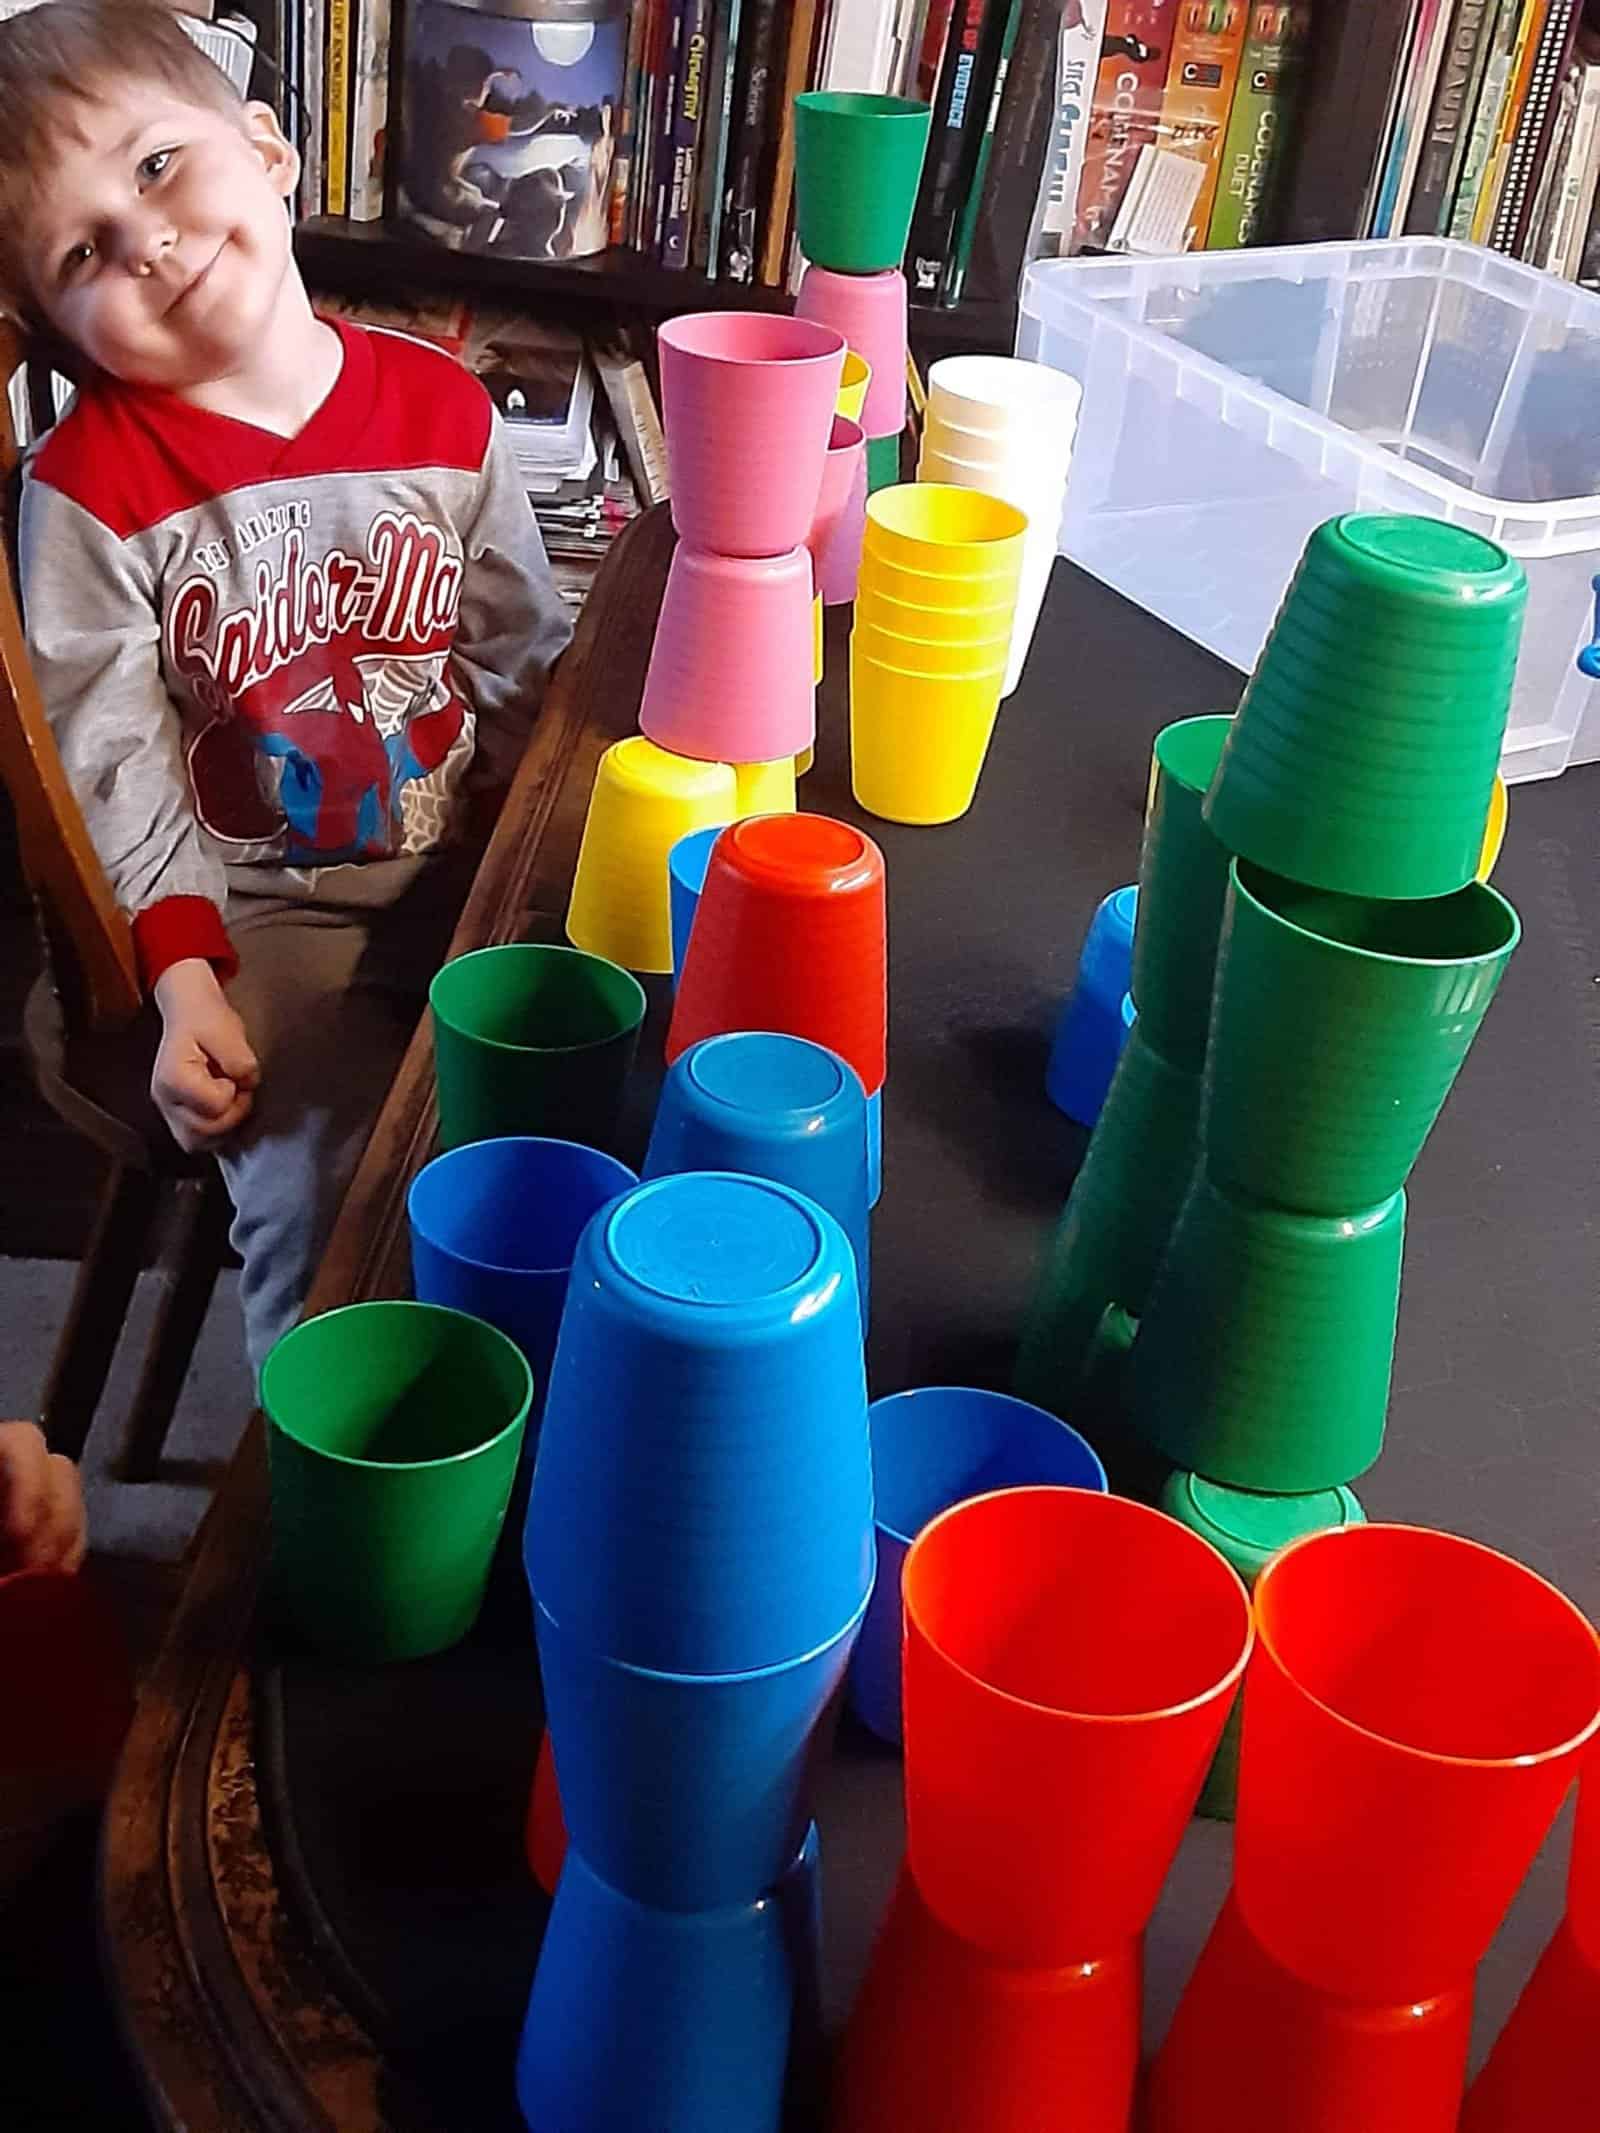 cups and a kid smiling